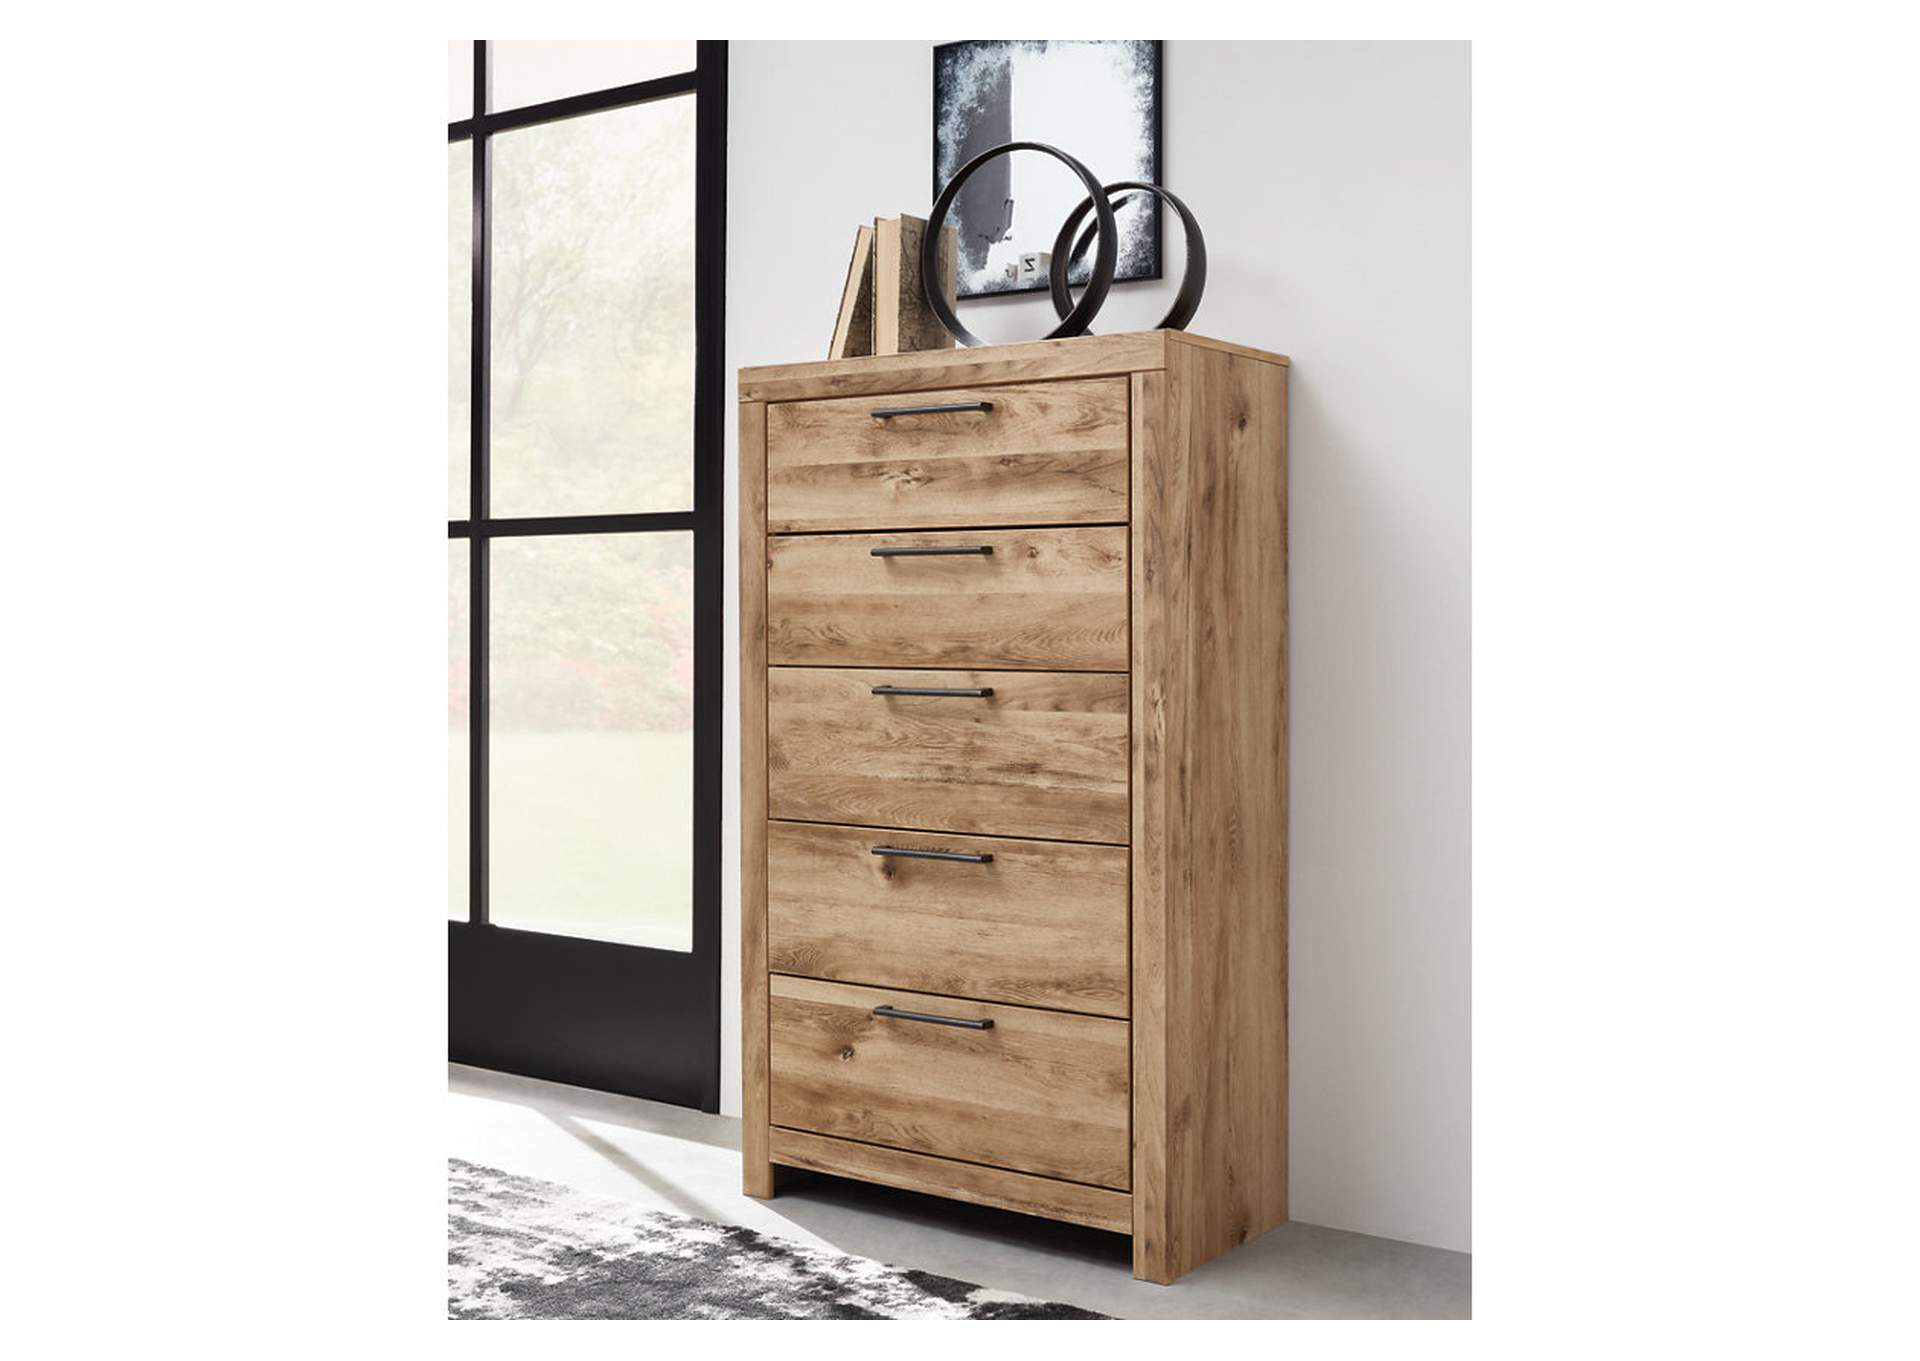 Hyanna Chest of Drawers,Signature Design By Ashley